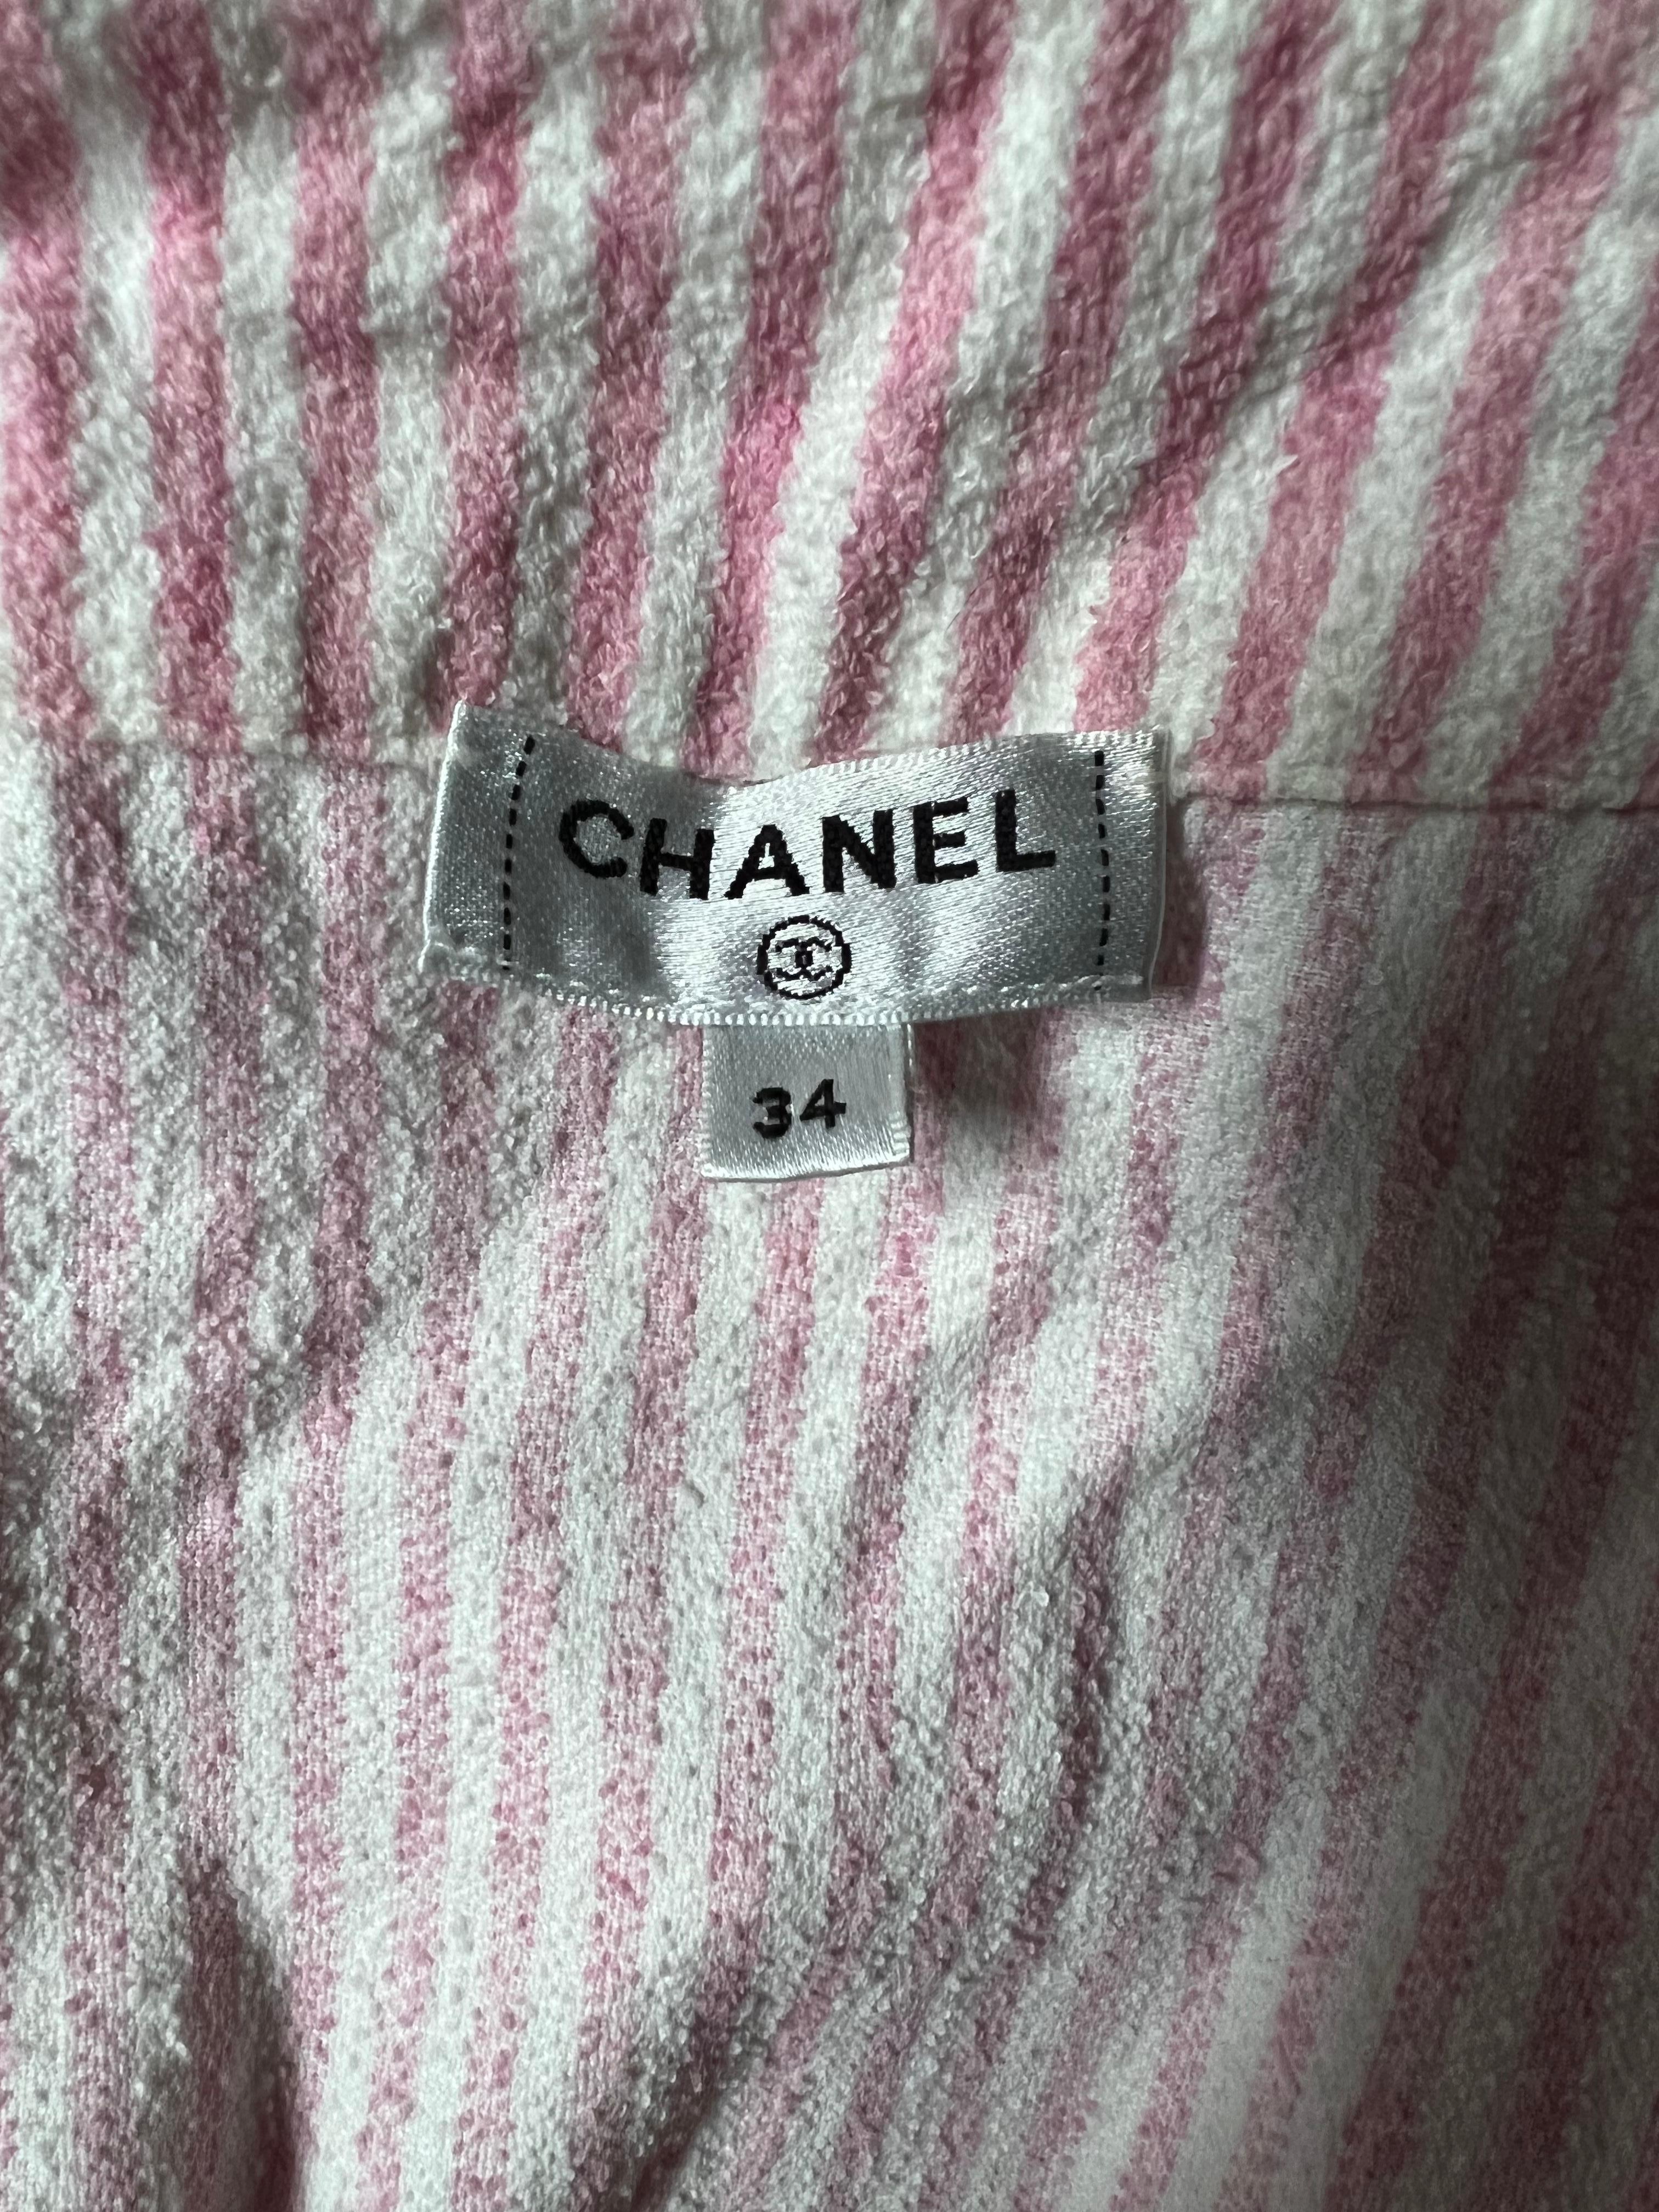 Women's Chanel Pink and White Terry Cloth Robe Jacket, Size 34